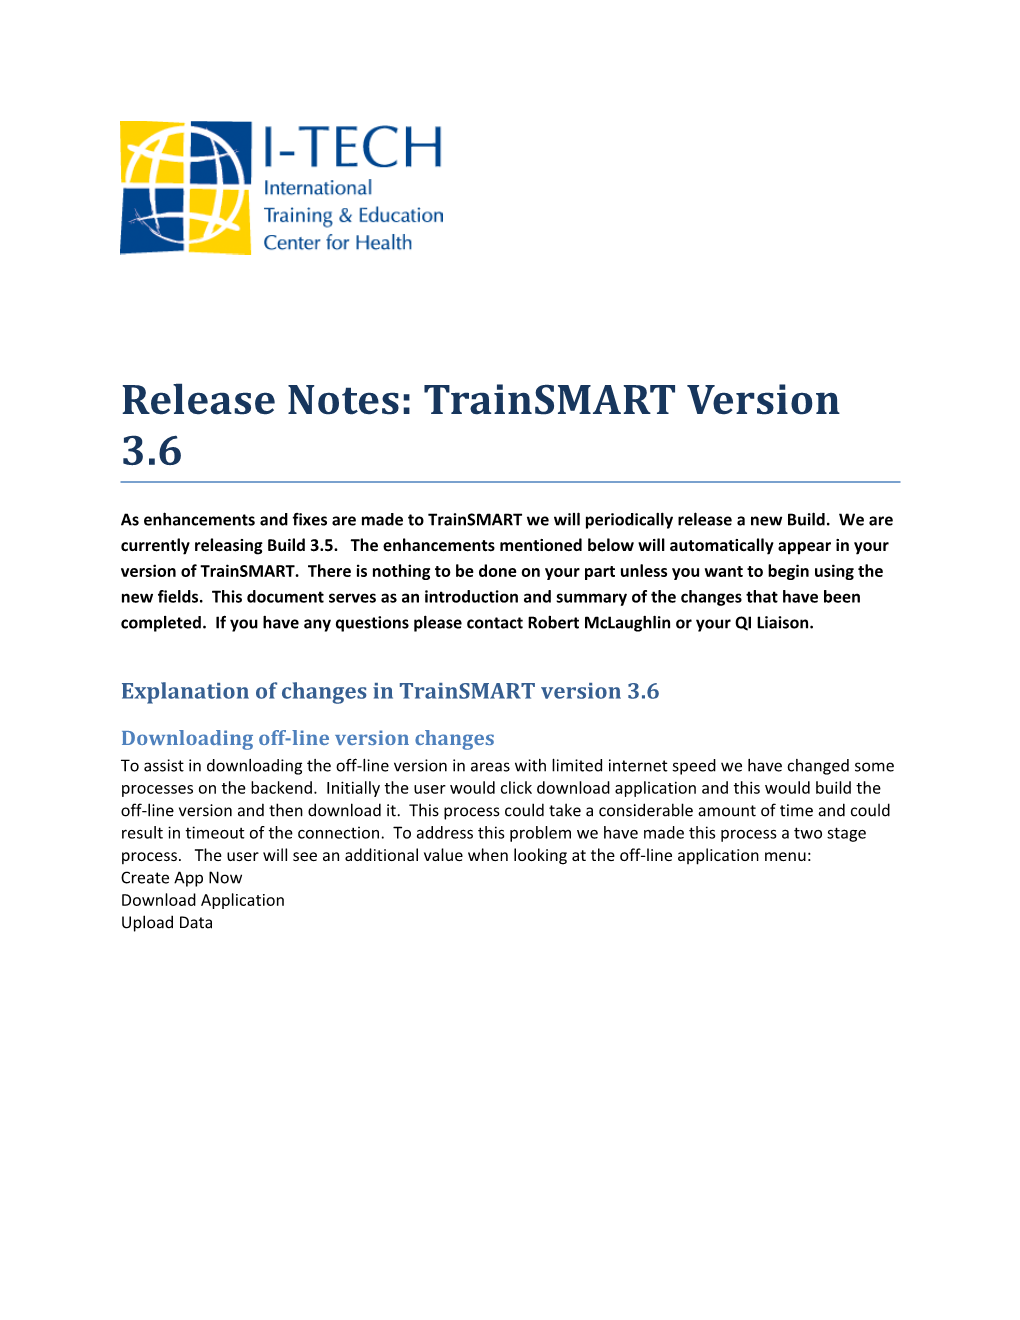 Explanation of Changes in Trainsmart Version 3.6